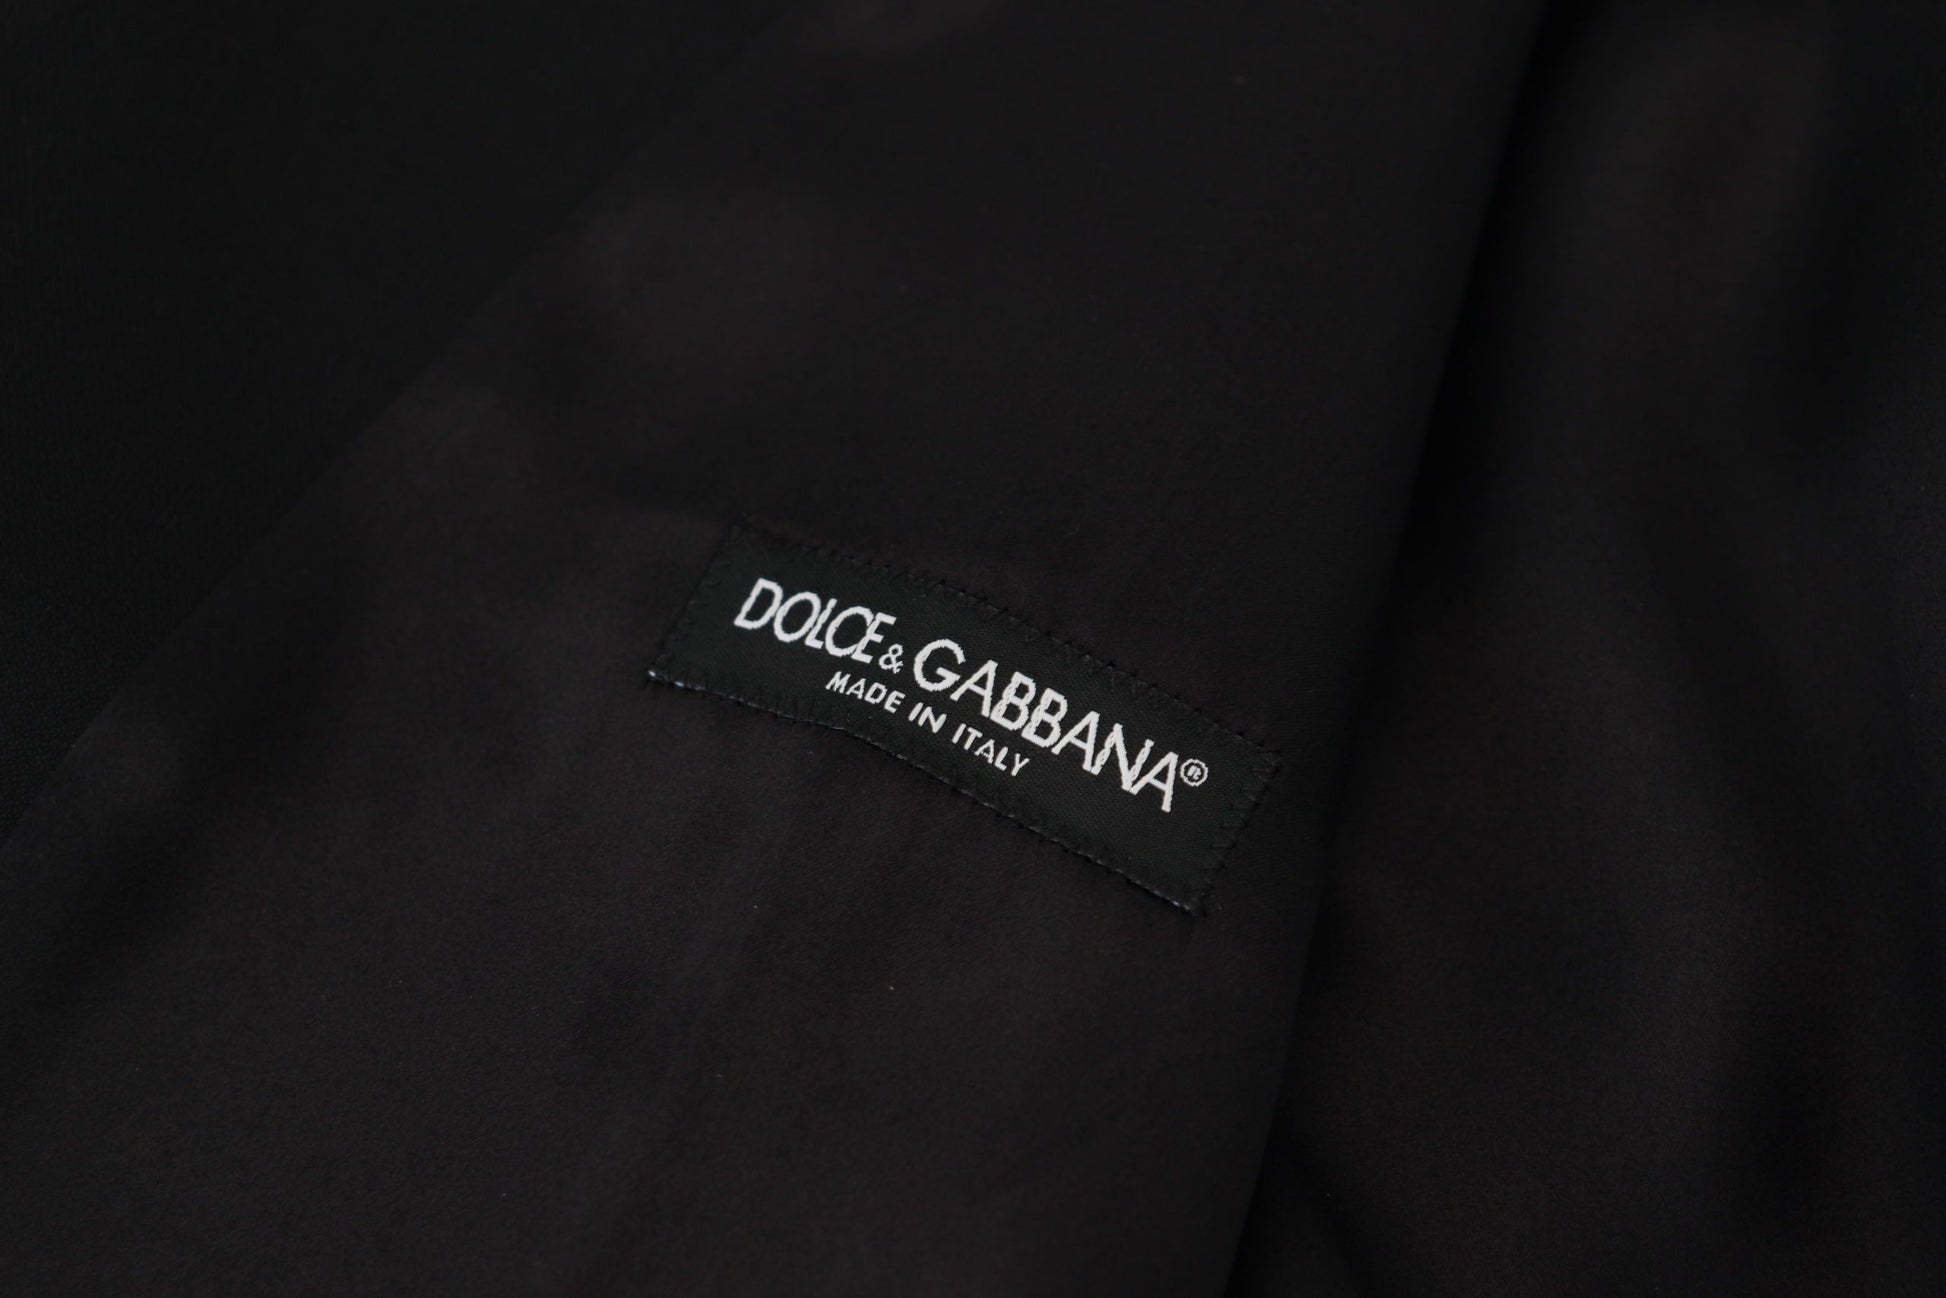 Dolce & Gabbana Black Virgin Wool Waistcoat Formal Dress Vest - Designed by Dolce & Gabbana Available to Buy at a Discounted Price on Moon Behind The Hill Online Designer Discount Store